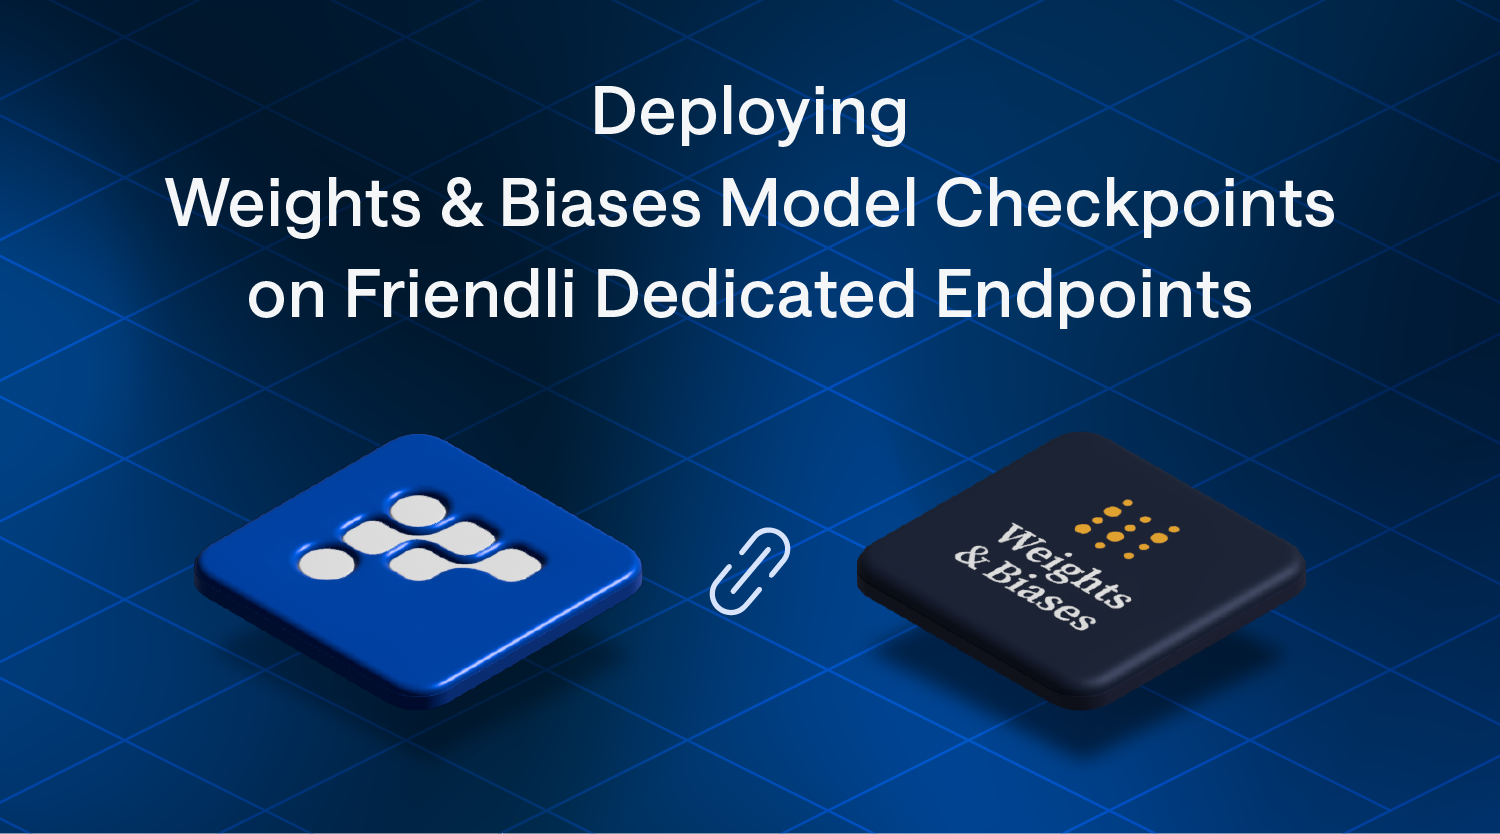 Deploying Weights & Biases Model Checkpoints on Friendli Dedicated Endpoints thumbnail